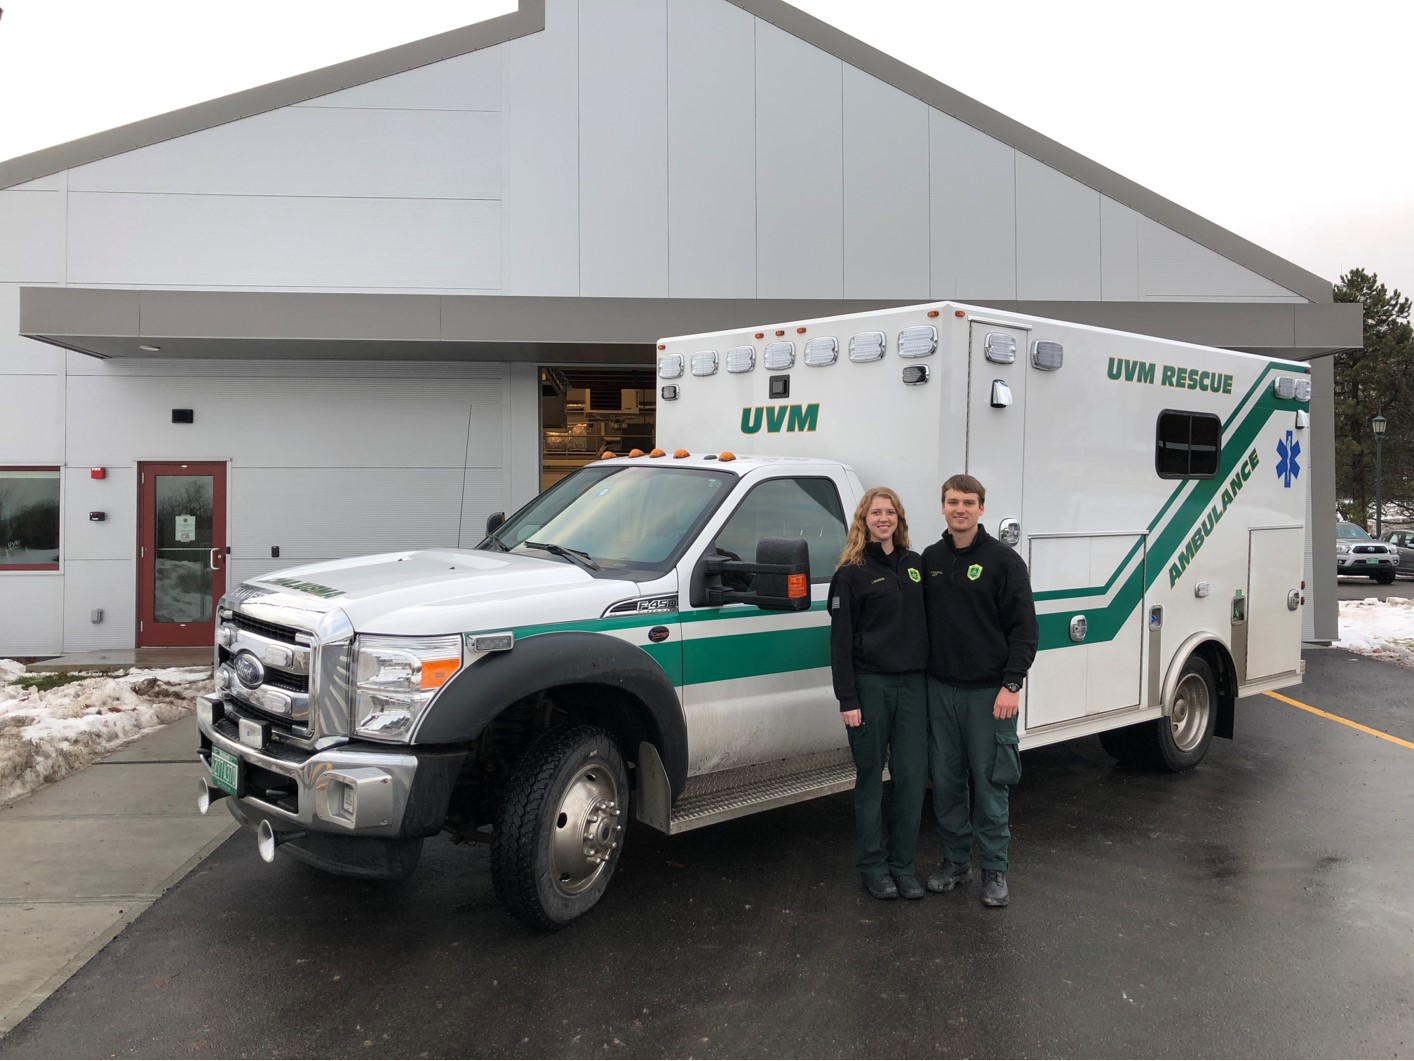 Libby Schwab, F'14, and Kyle Titsworth, S'12, on duty together for UVM Rescue.&nbsp;